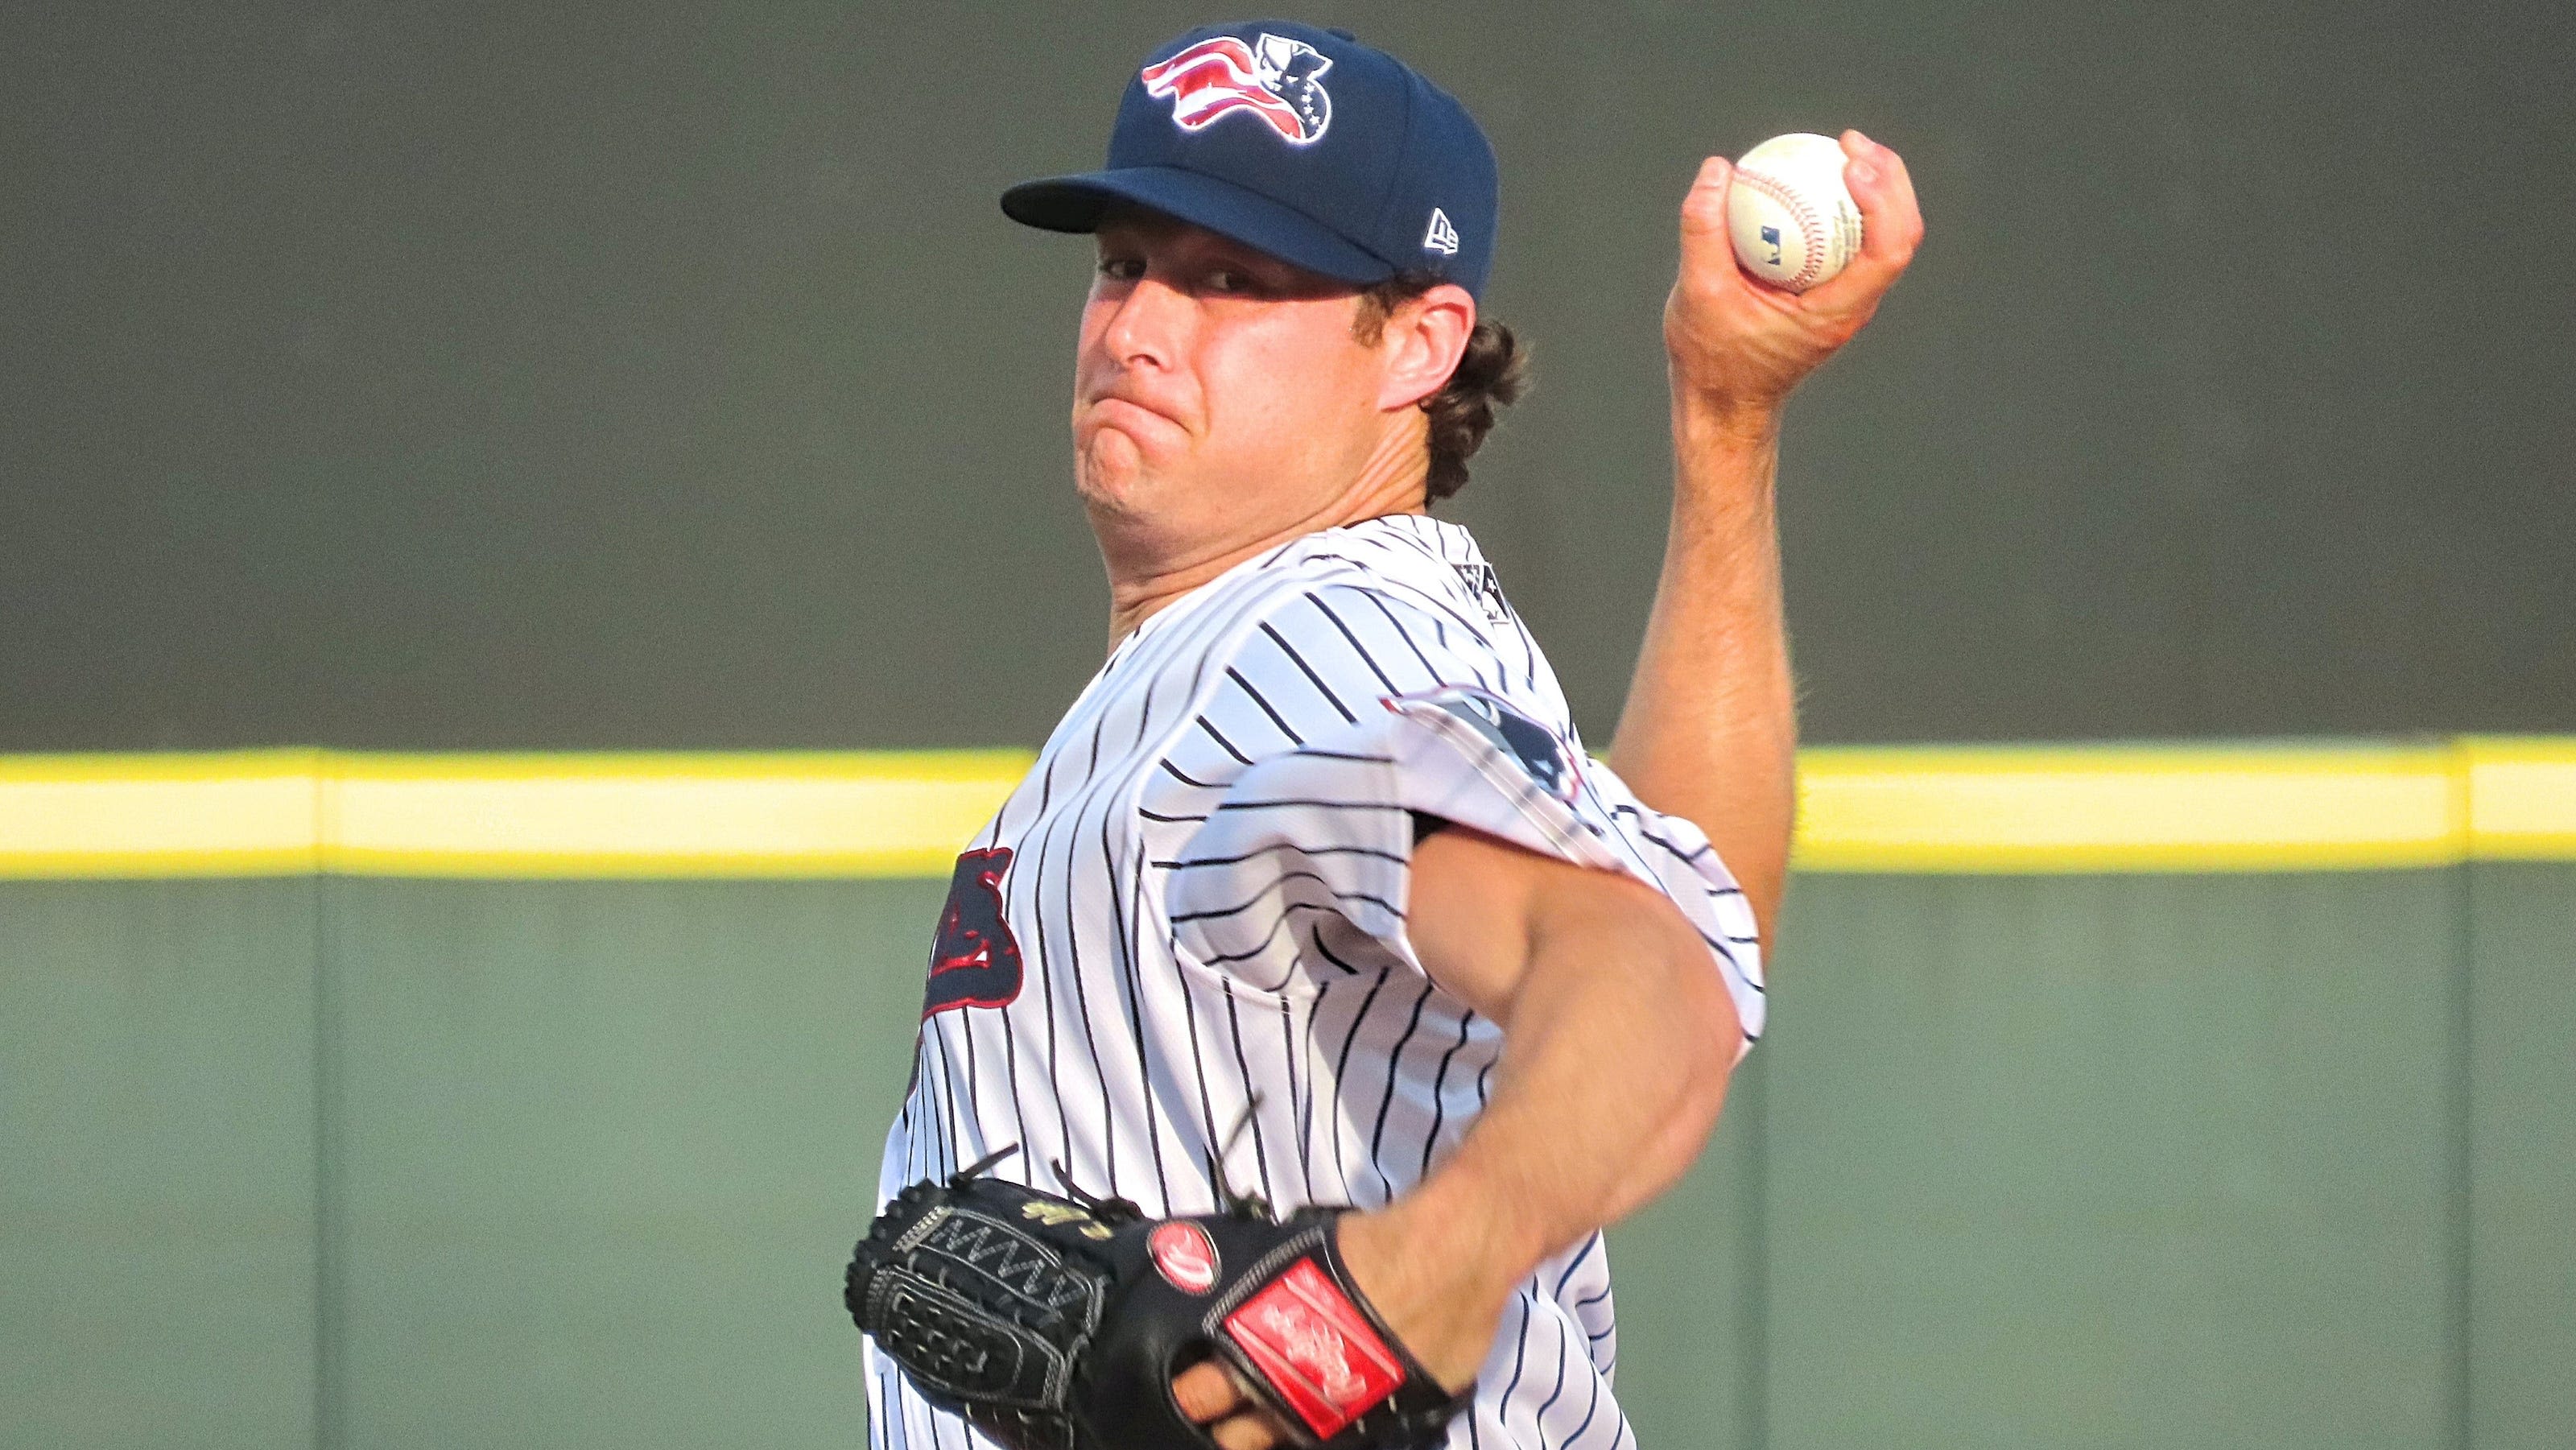 Gerrit Cole makes rehab start for Somerset Patriots. Here's how it went and what he said